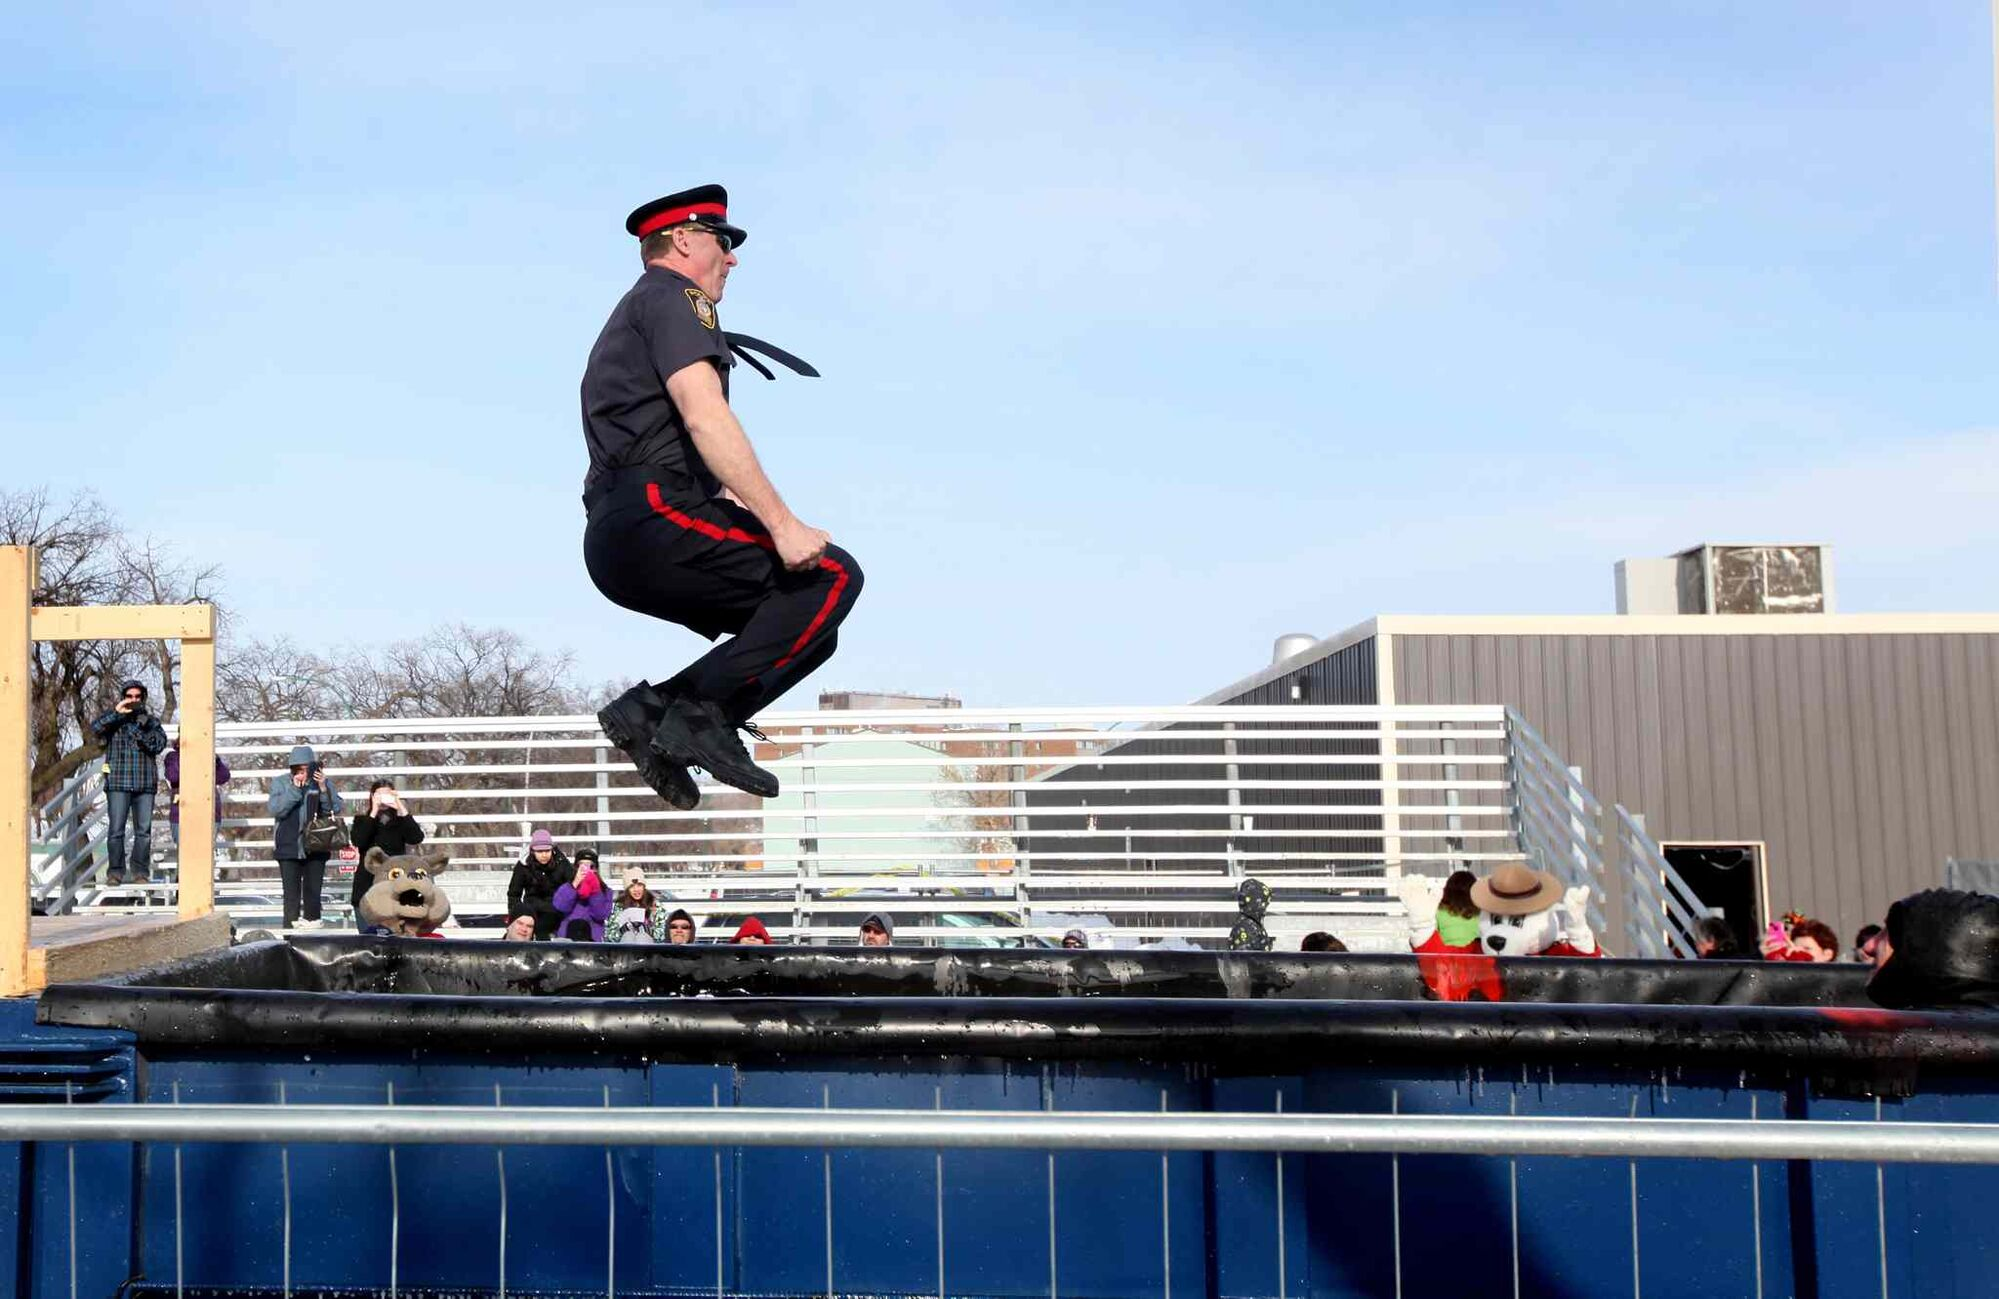 A police officer midair jumping into a pool for a meagre crowd of onlookers